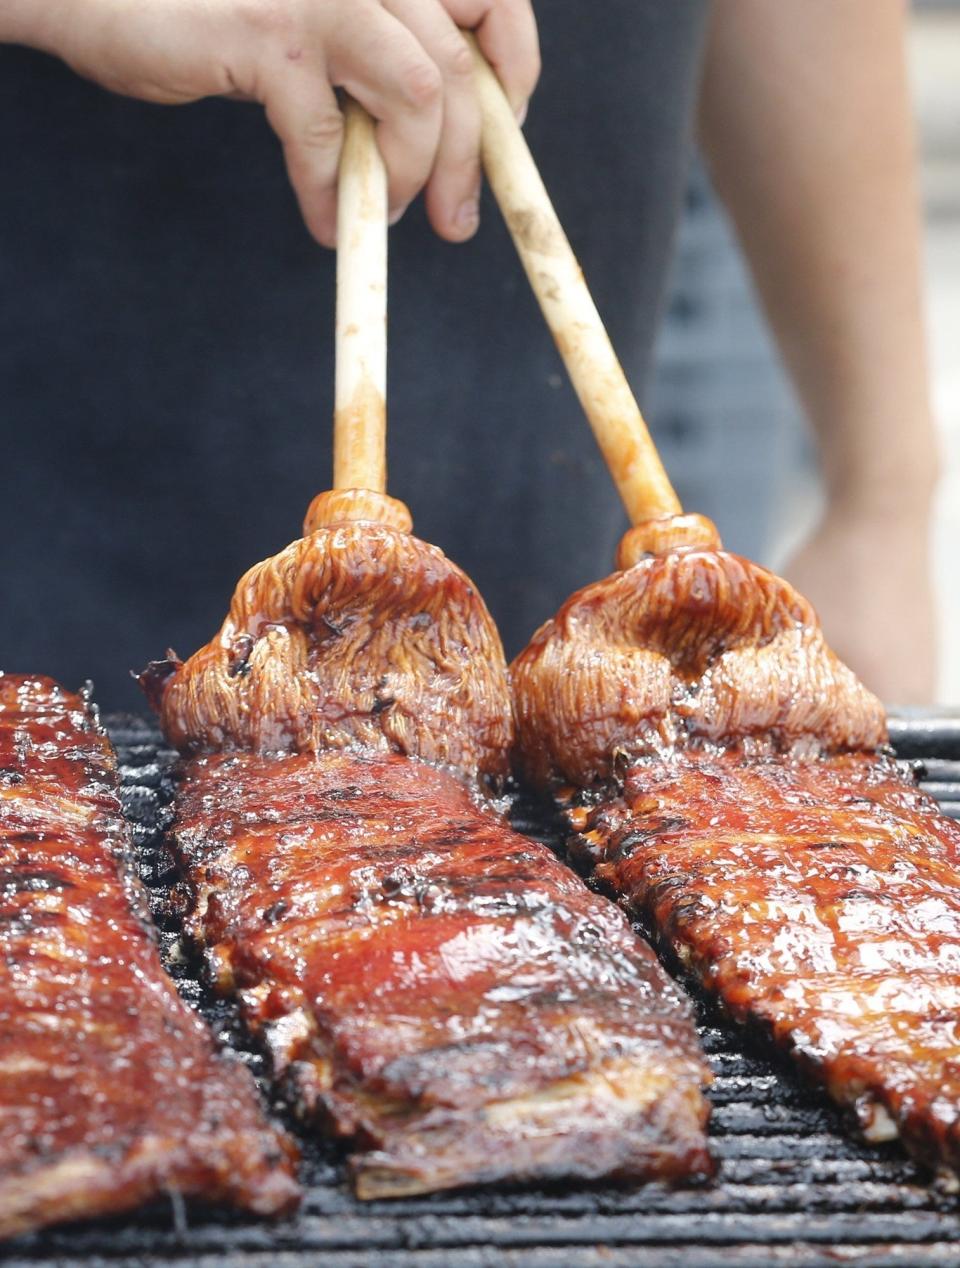 Ribs are brushed with sauce at Akron's 2019 Rib, White, and Blue Festival.